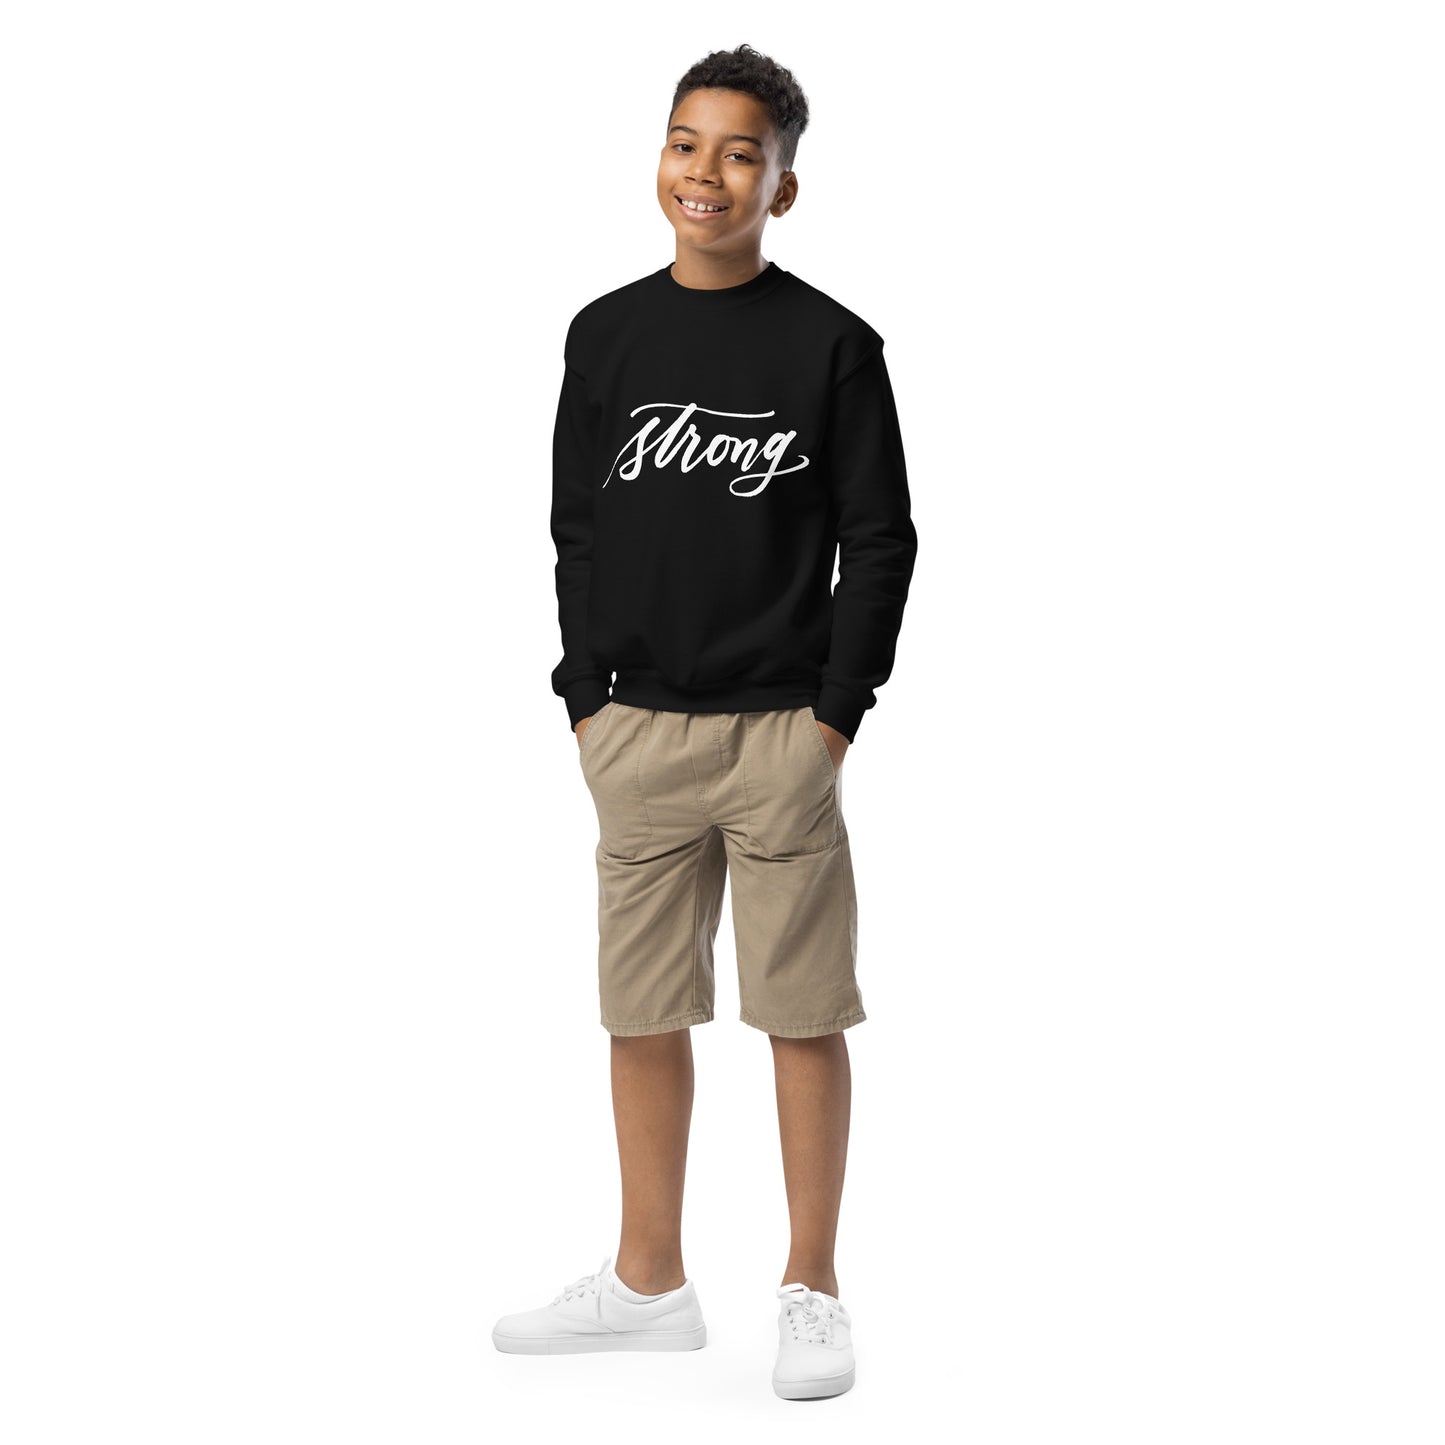 White Script "Strong" Calligraphy Printed on Kids' Crewneck Sweatshirt (Youth Sizes)